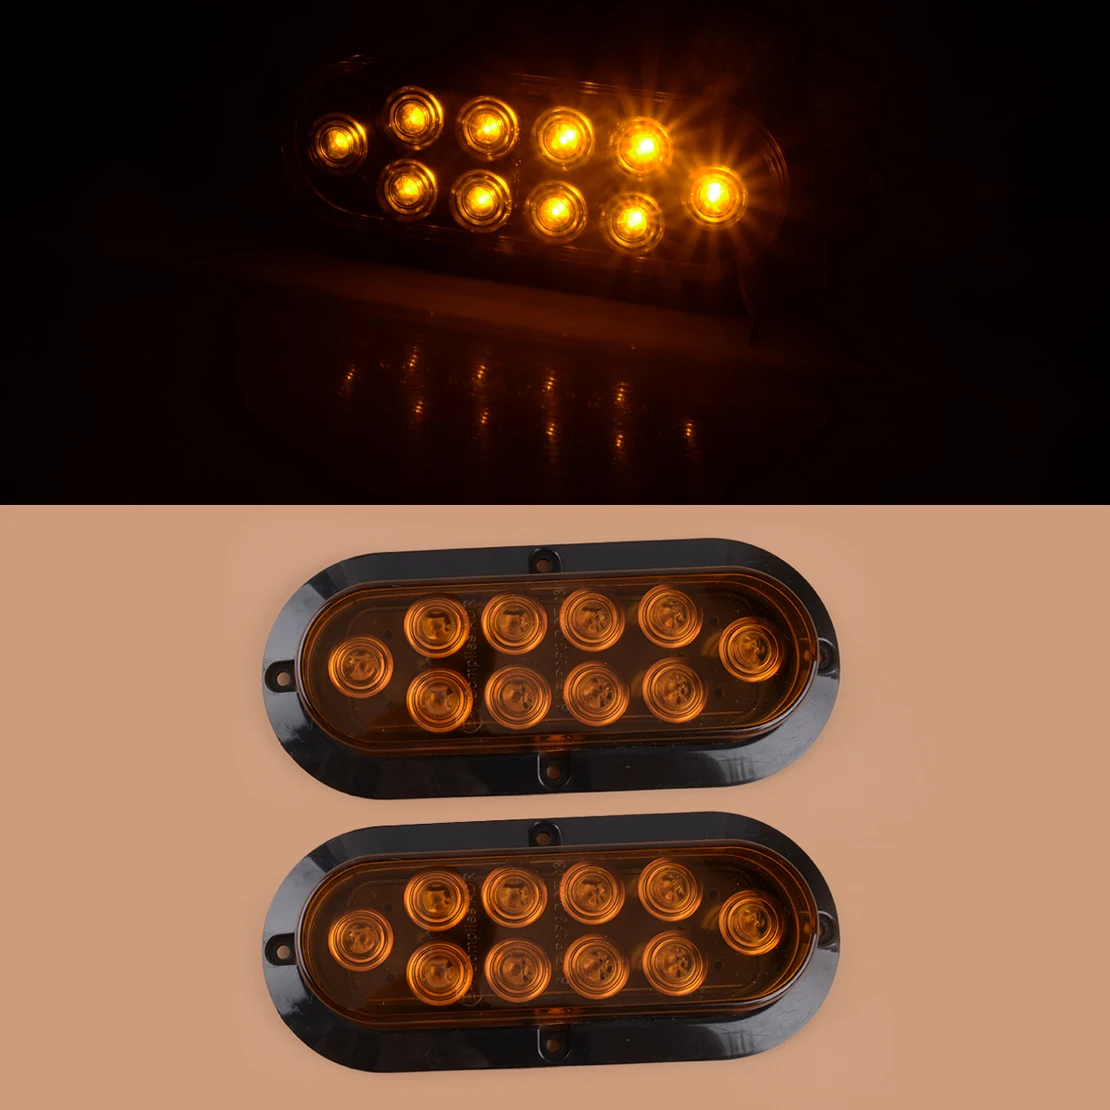 

2Pcs Amber 10LED Oval Stop Turn Signal Tail Backup Reverse Brake Light 12V DC Fit for Truck Trailer Cargo Tractors Bus